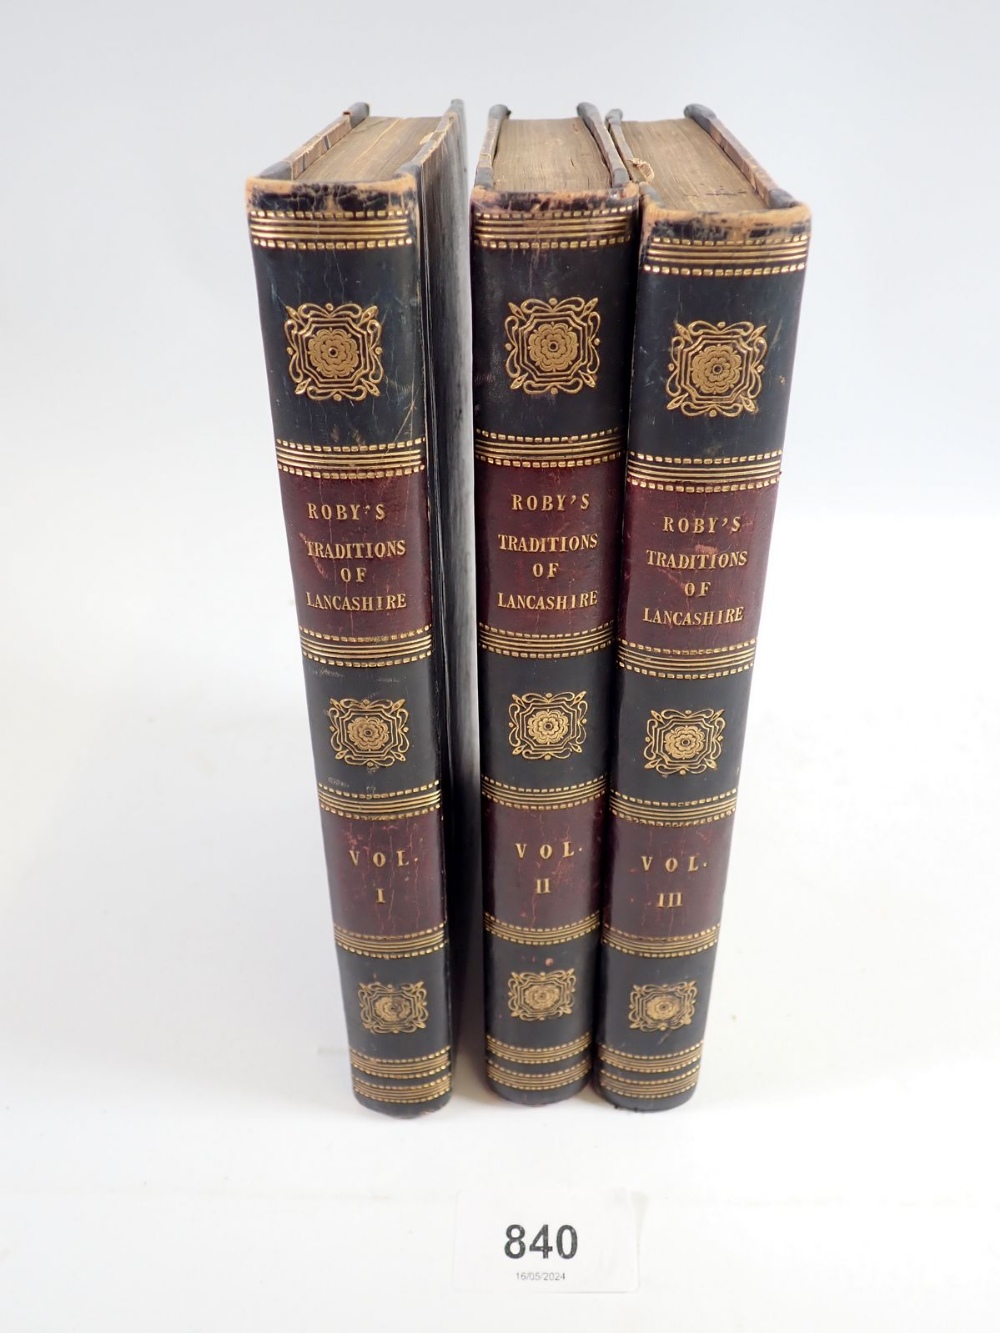 Popular Traditions of England by J Roby, Lancashire - three volumes with leather and marble